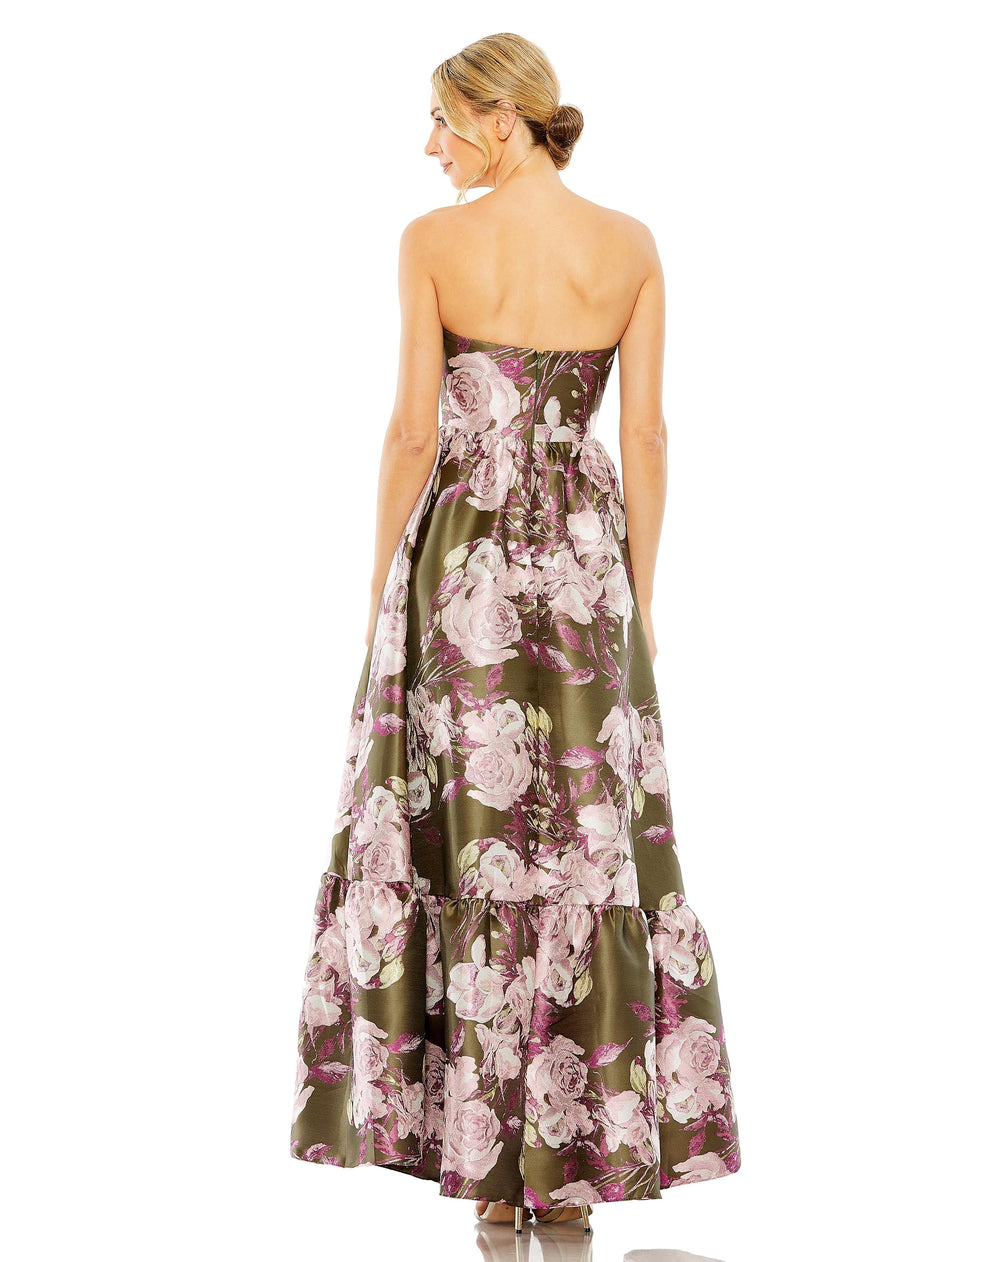 Strapless Bottom Ruffle Floral Gown - FOSTANI